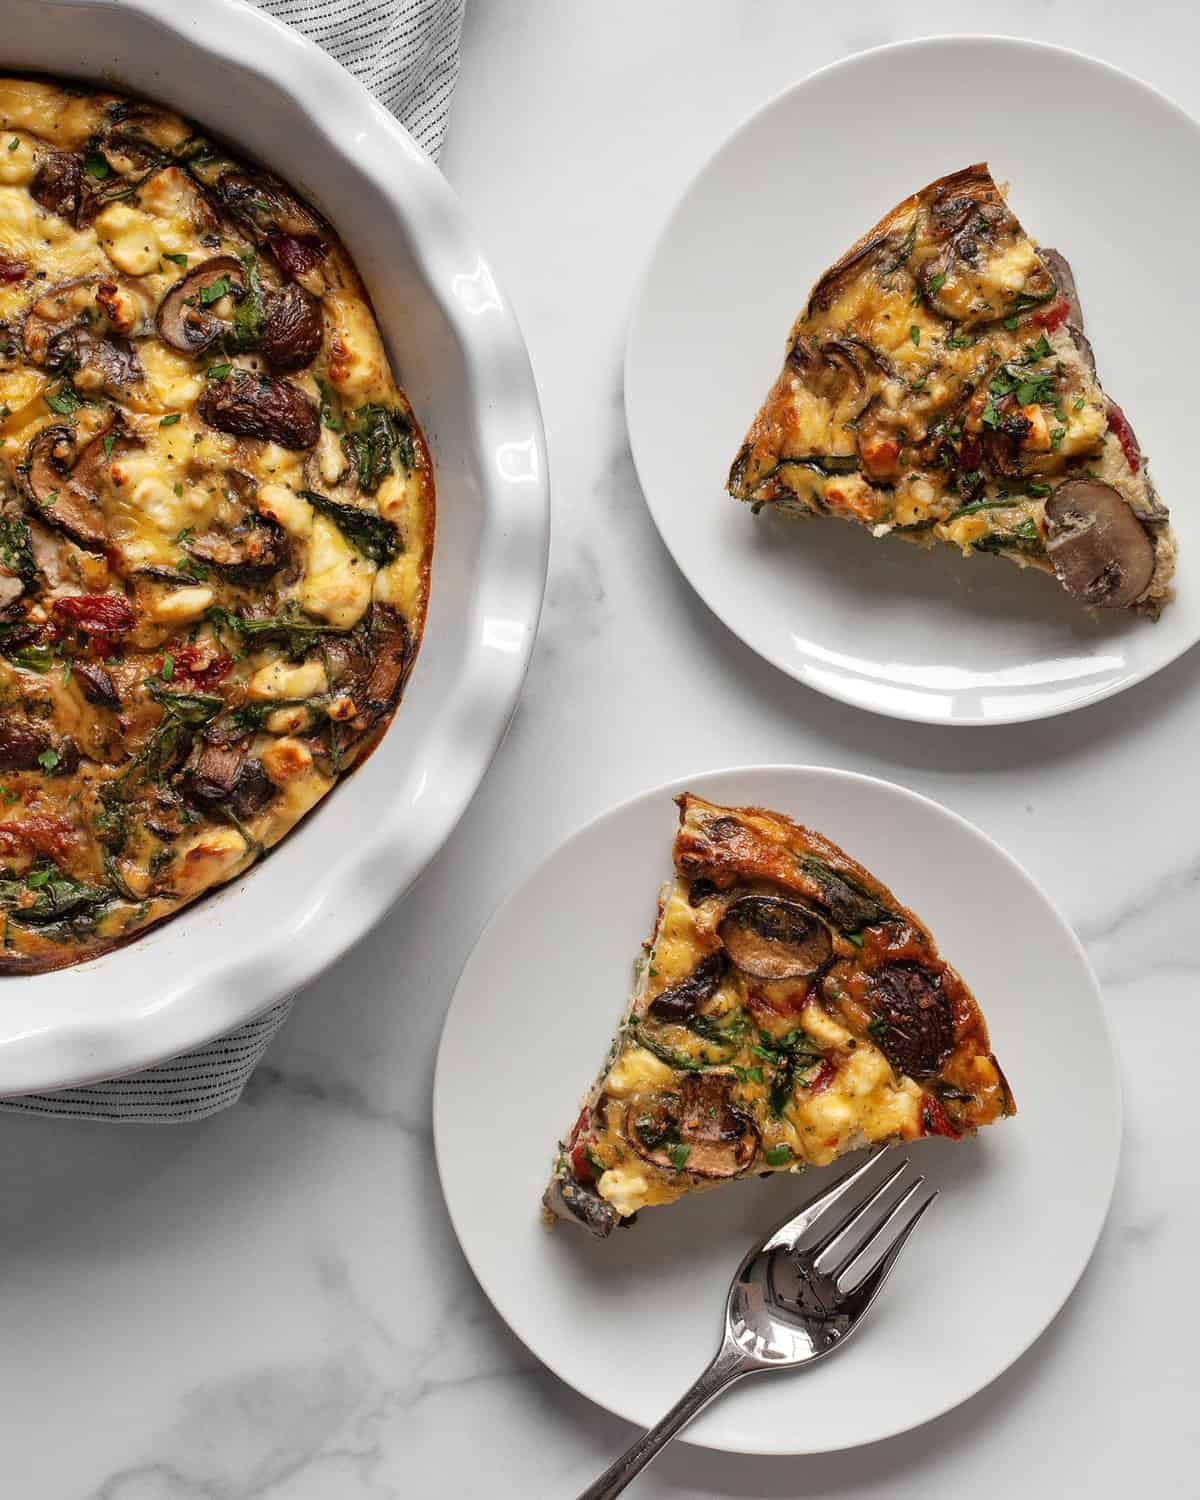 Crustless quiche with mushrooms, peppers, spinach and feta cut into 2 slices.